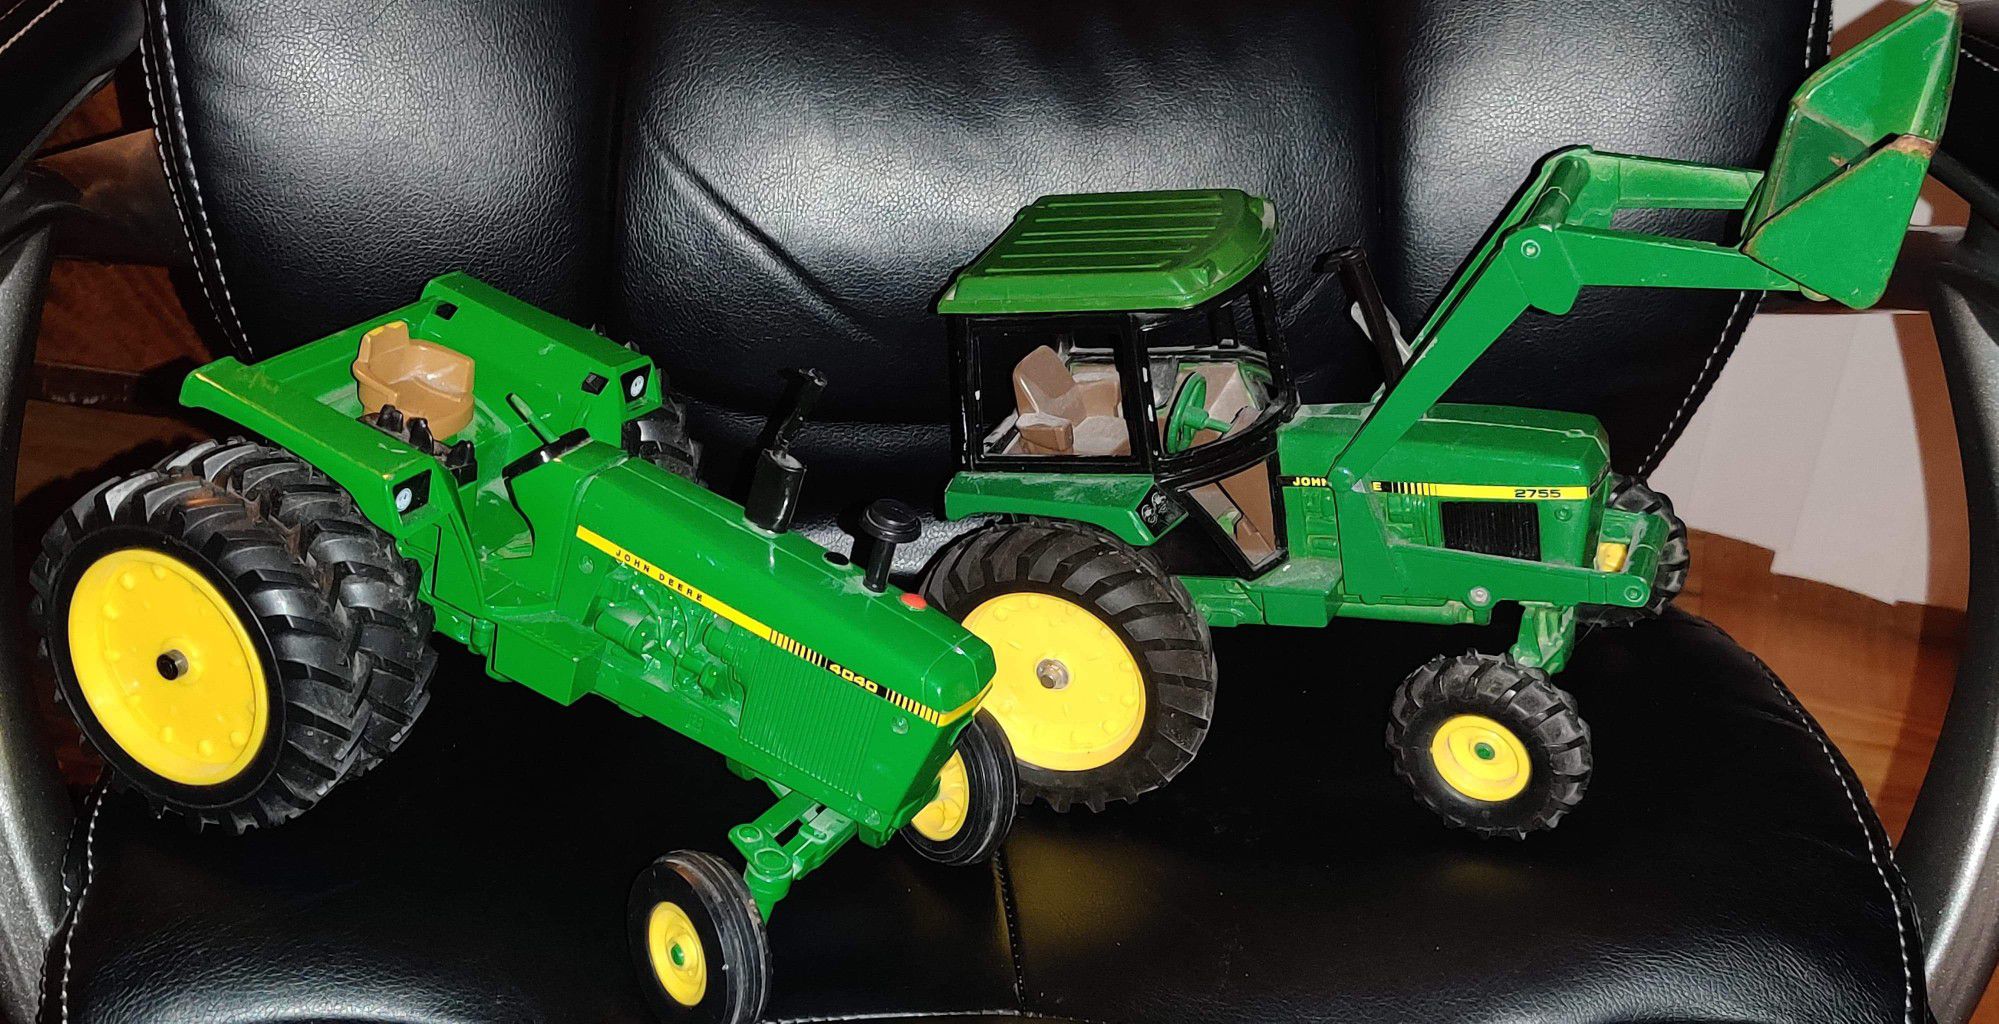 John Deere 4040 Toy Tractor with Diecast rims & John Deere 2755 tractor with loader